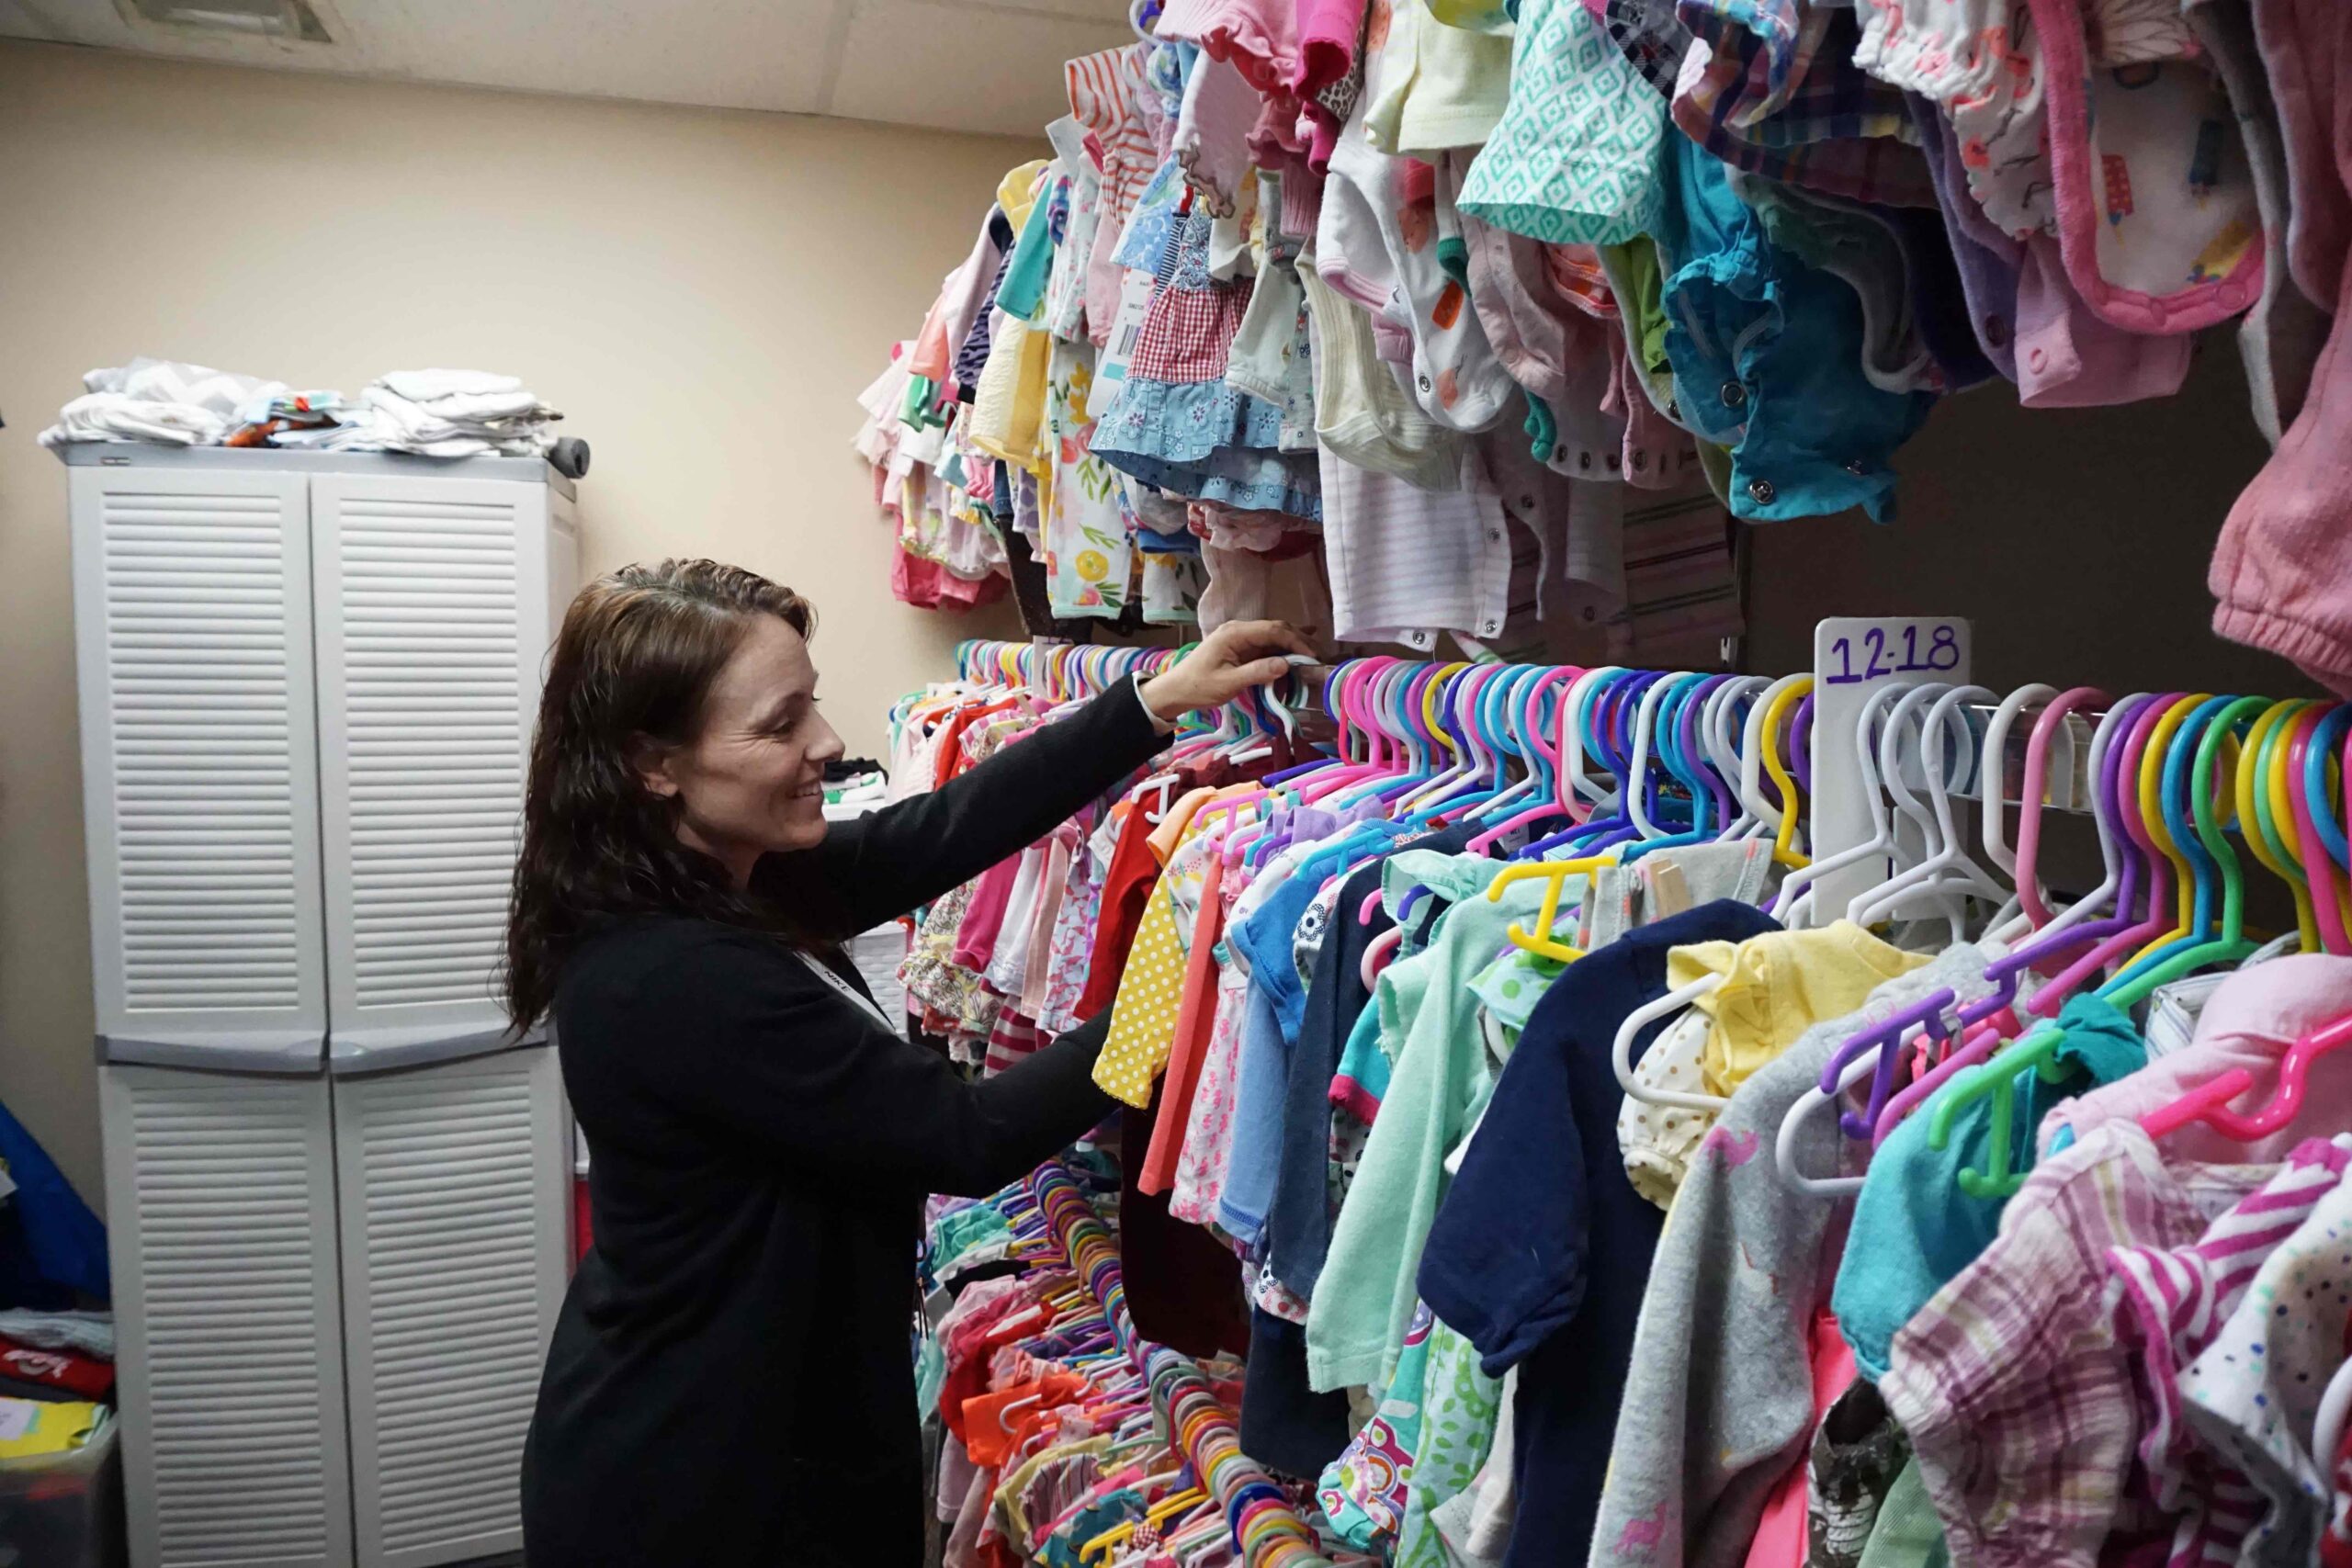 Woman peruses baby boutique at Catholic Charities. Photo by Colln Vogt